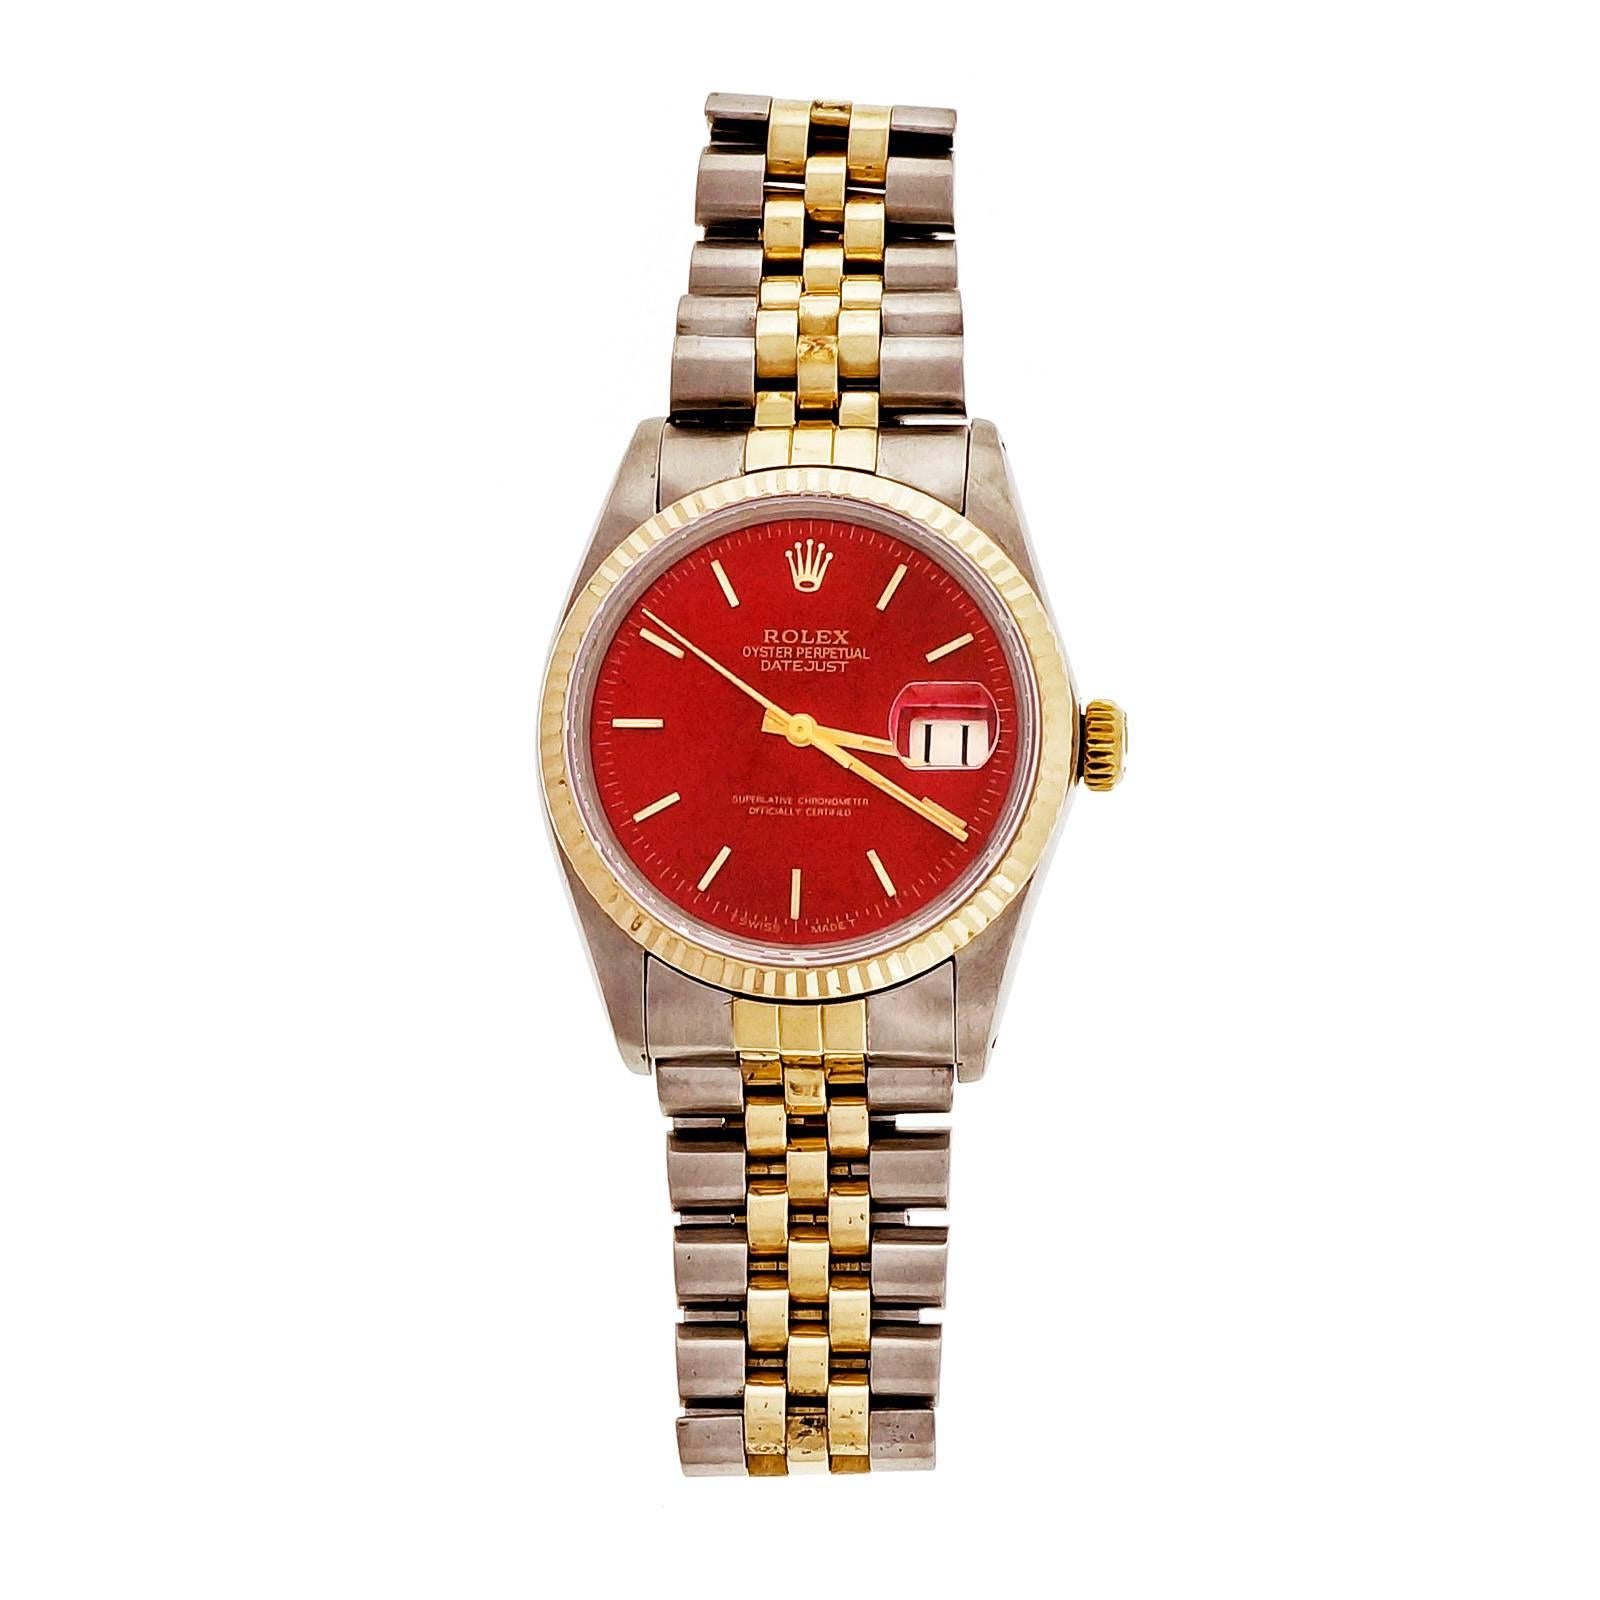 1981 Rolex Datejust, serviced. Original Rolex dial custom refinished with multiple layers of Ferrari red high luster finish by the Peter Suchy workshop. Gold markers and hands are original. 1981 original warranty papers.

18k yellow gold,